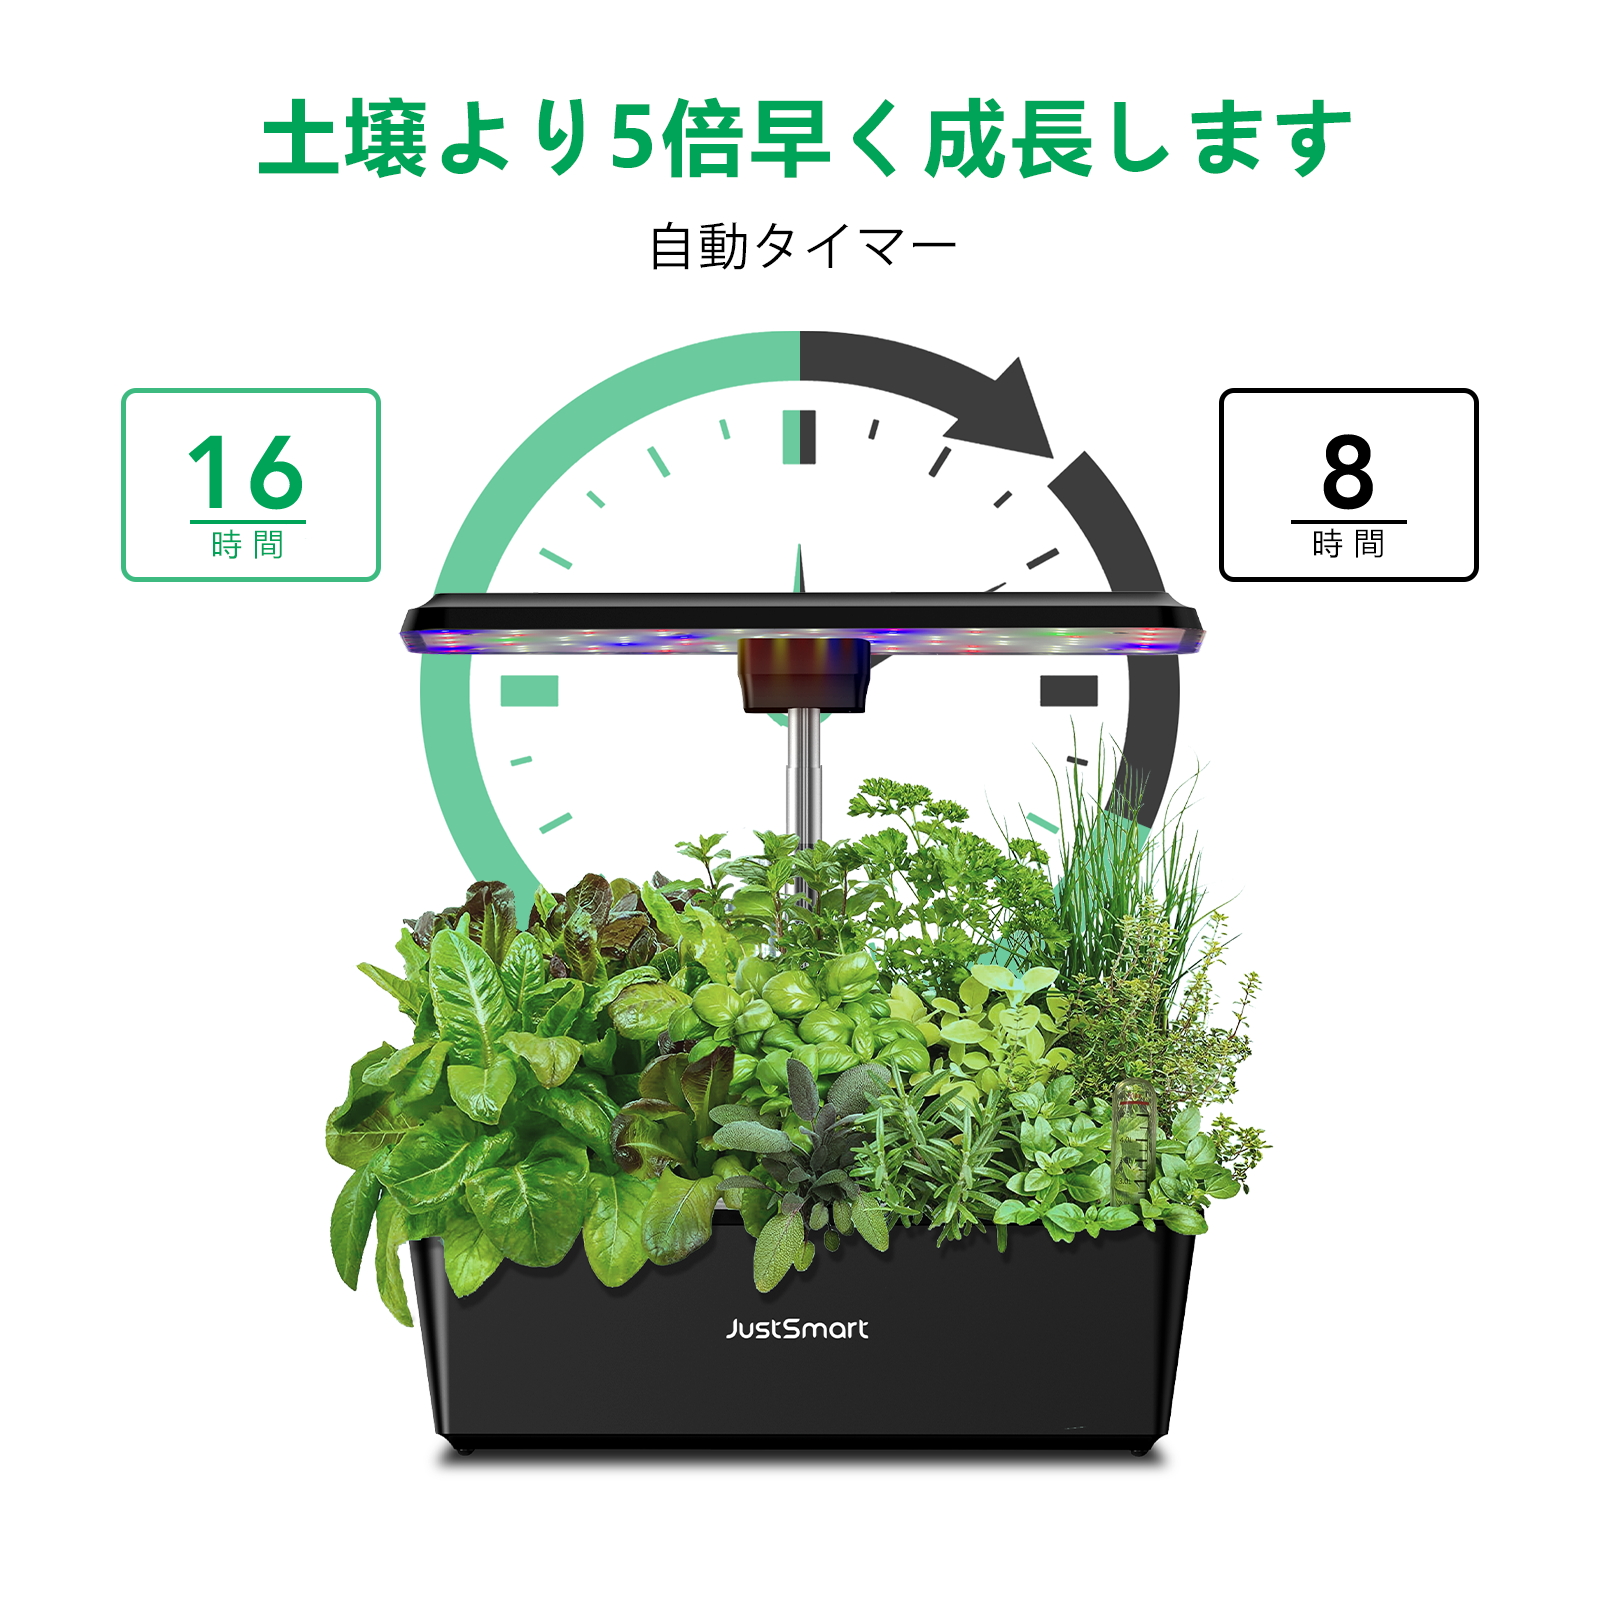 ZIREE 家庭菜園 水耕栽培キット 静音 野菜栽培セット　LEDライト 新品